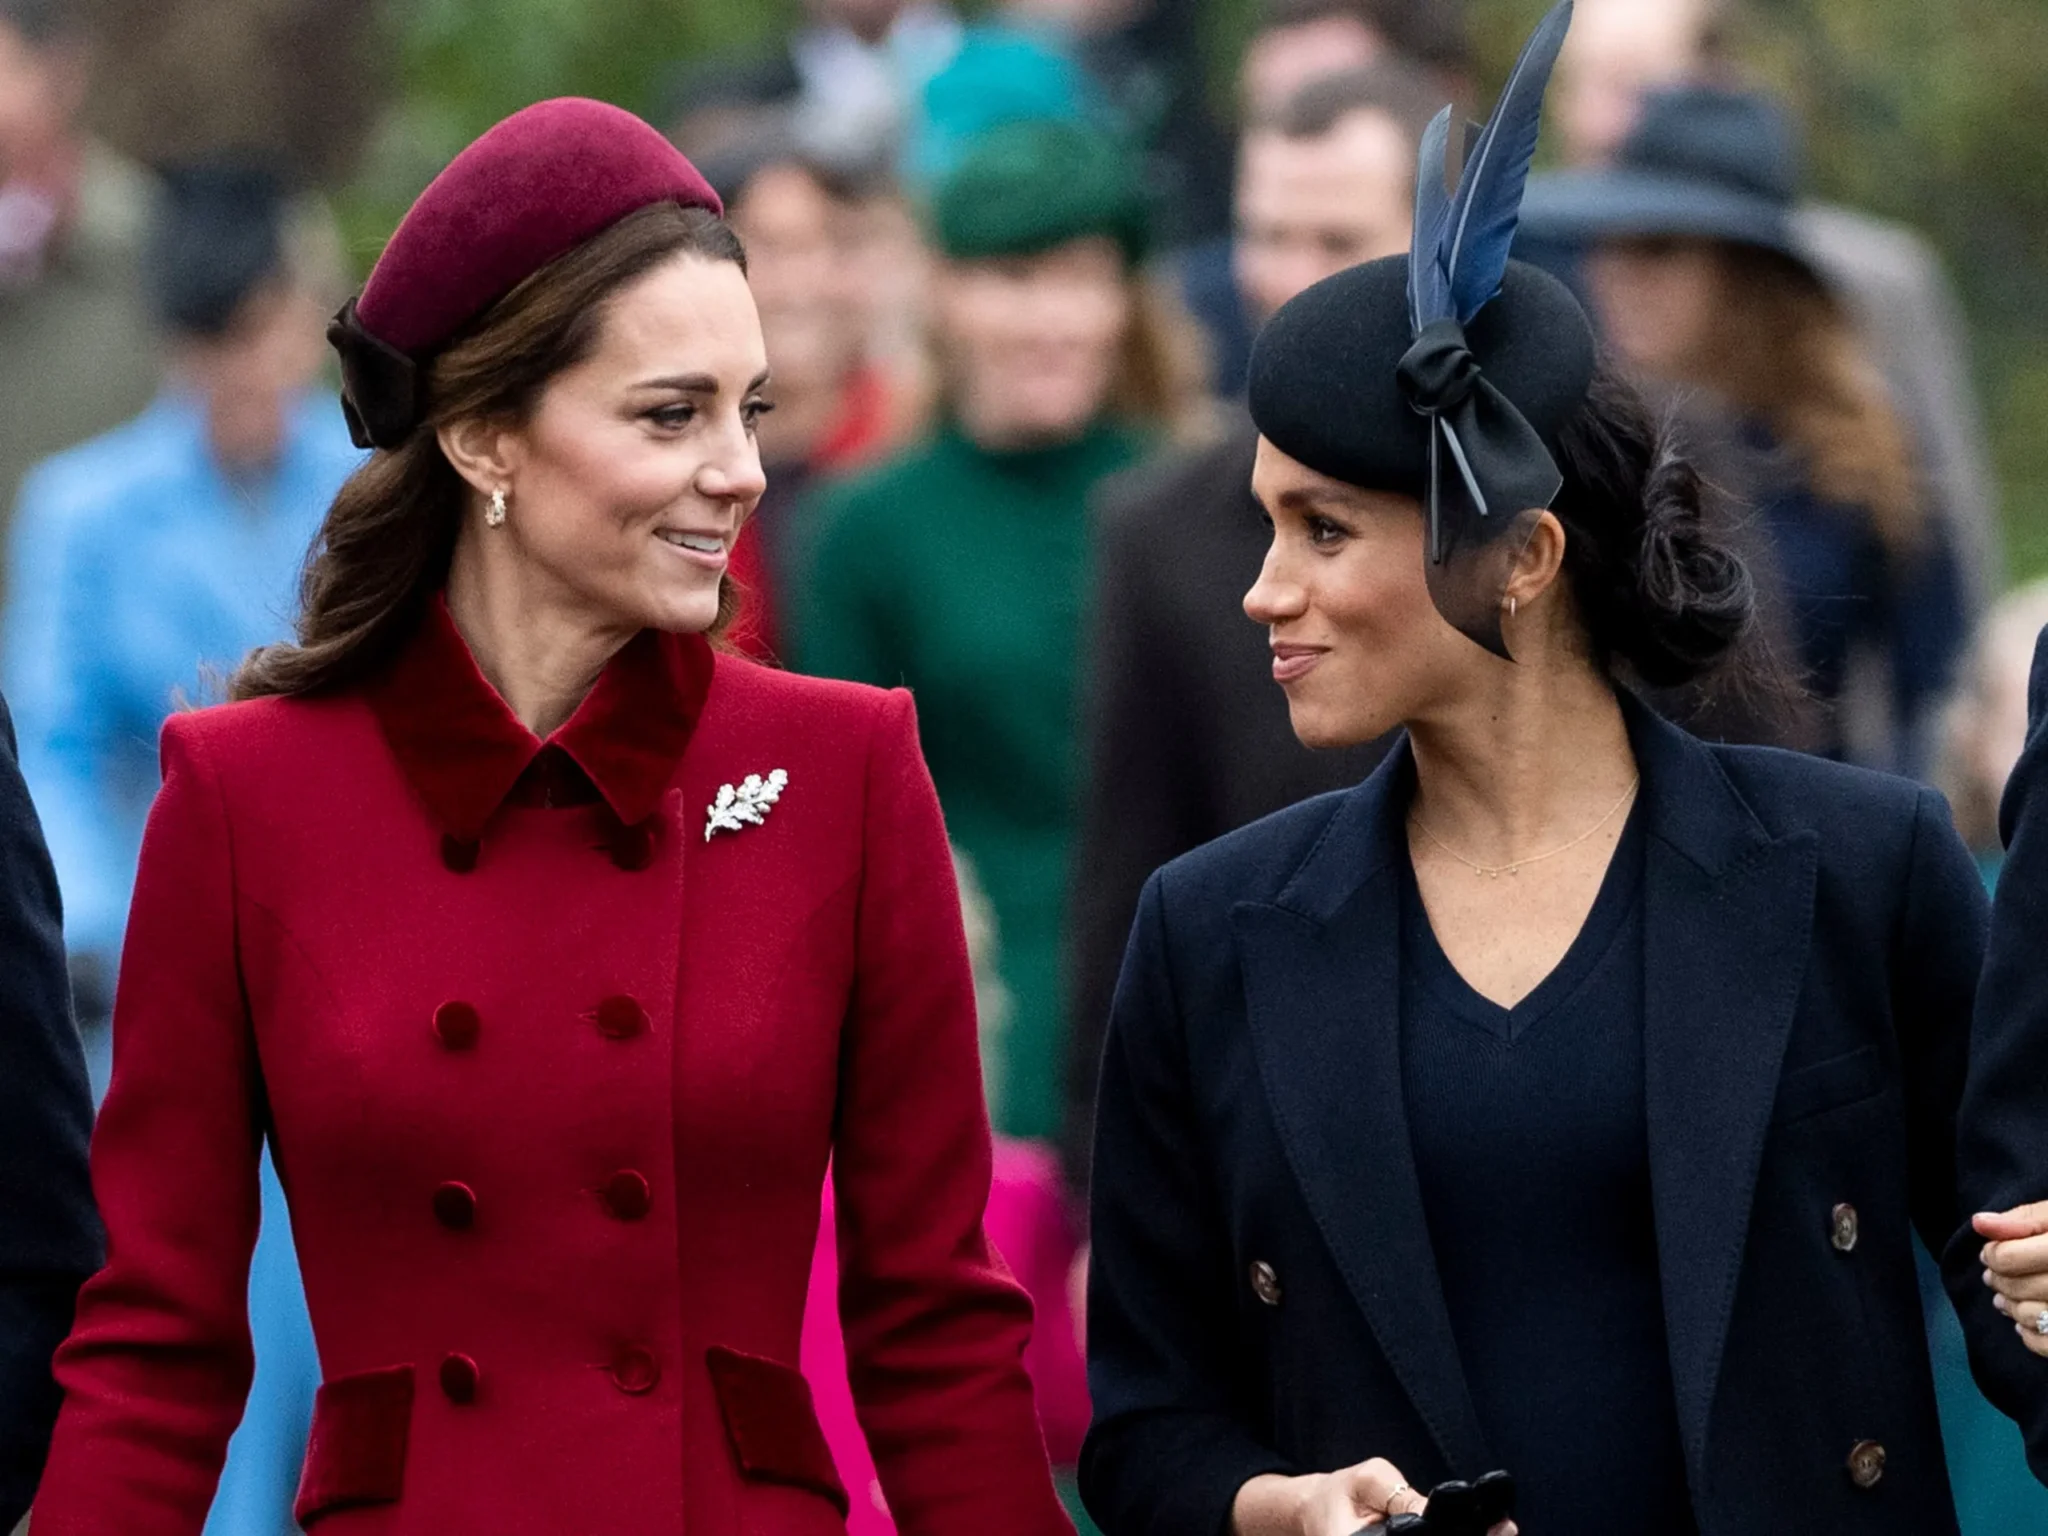 Meghan Markle’s reaction to Kate Middleton’s cancer diagnosis is absolutely heartbreaking – “it has become so poisonous”